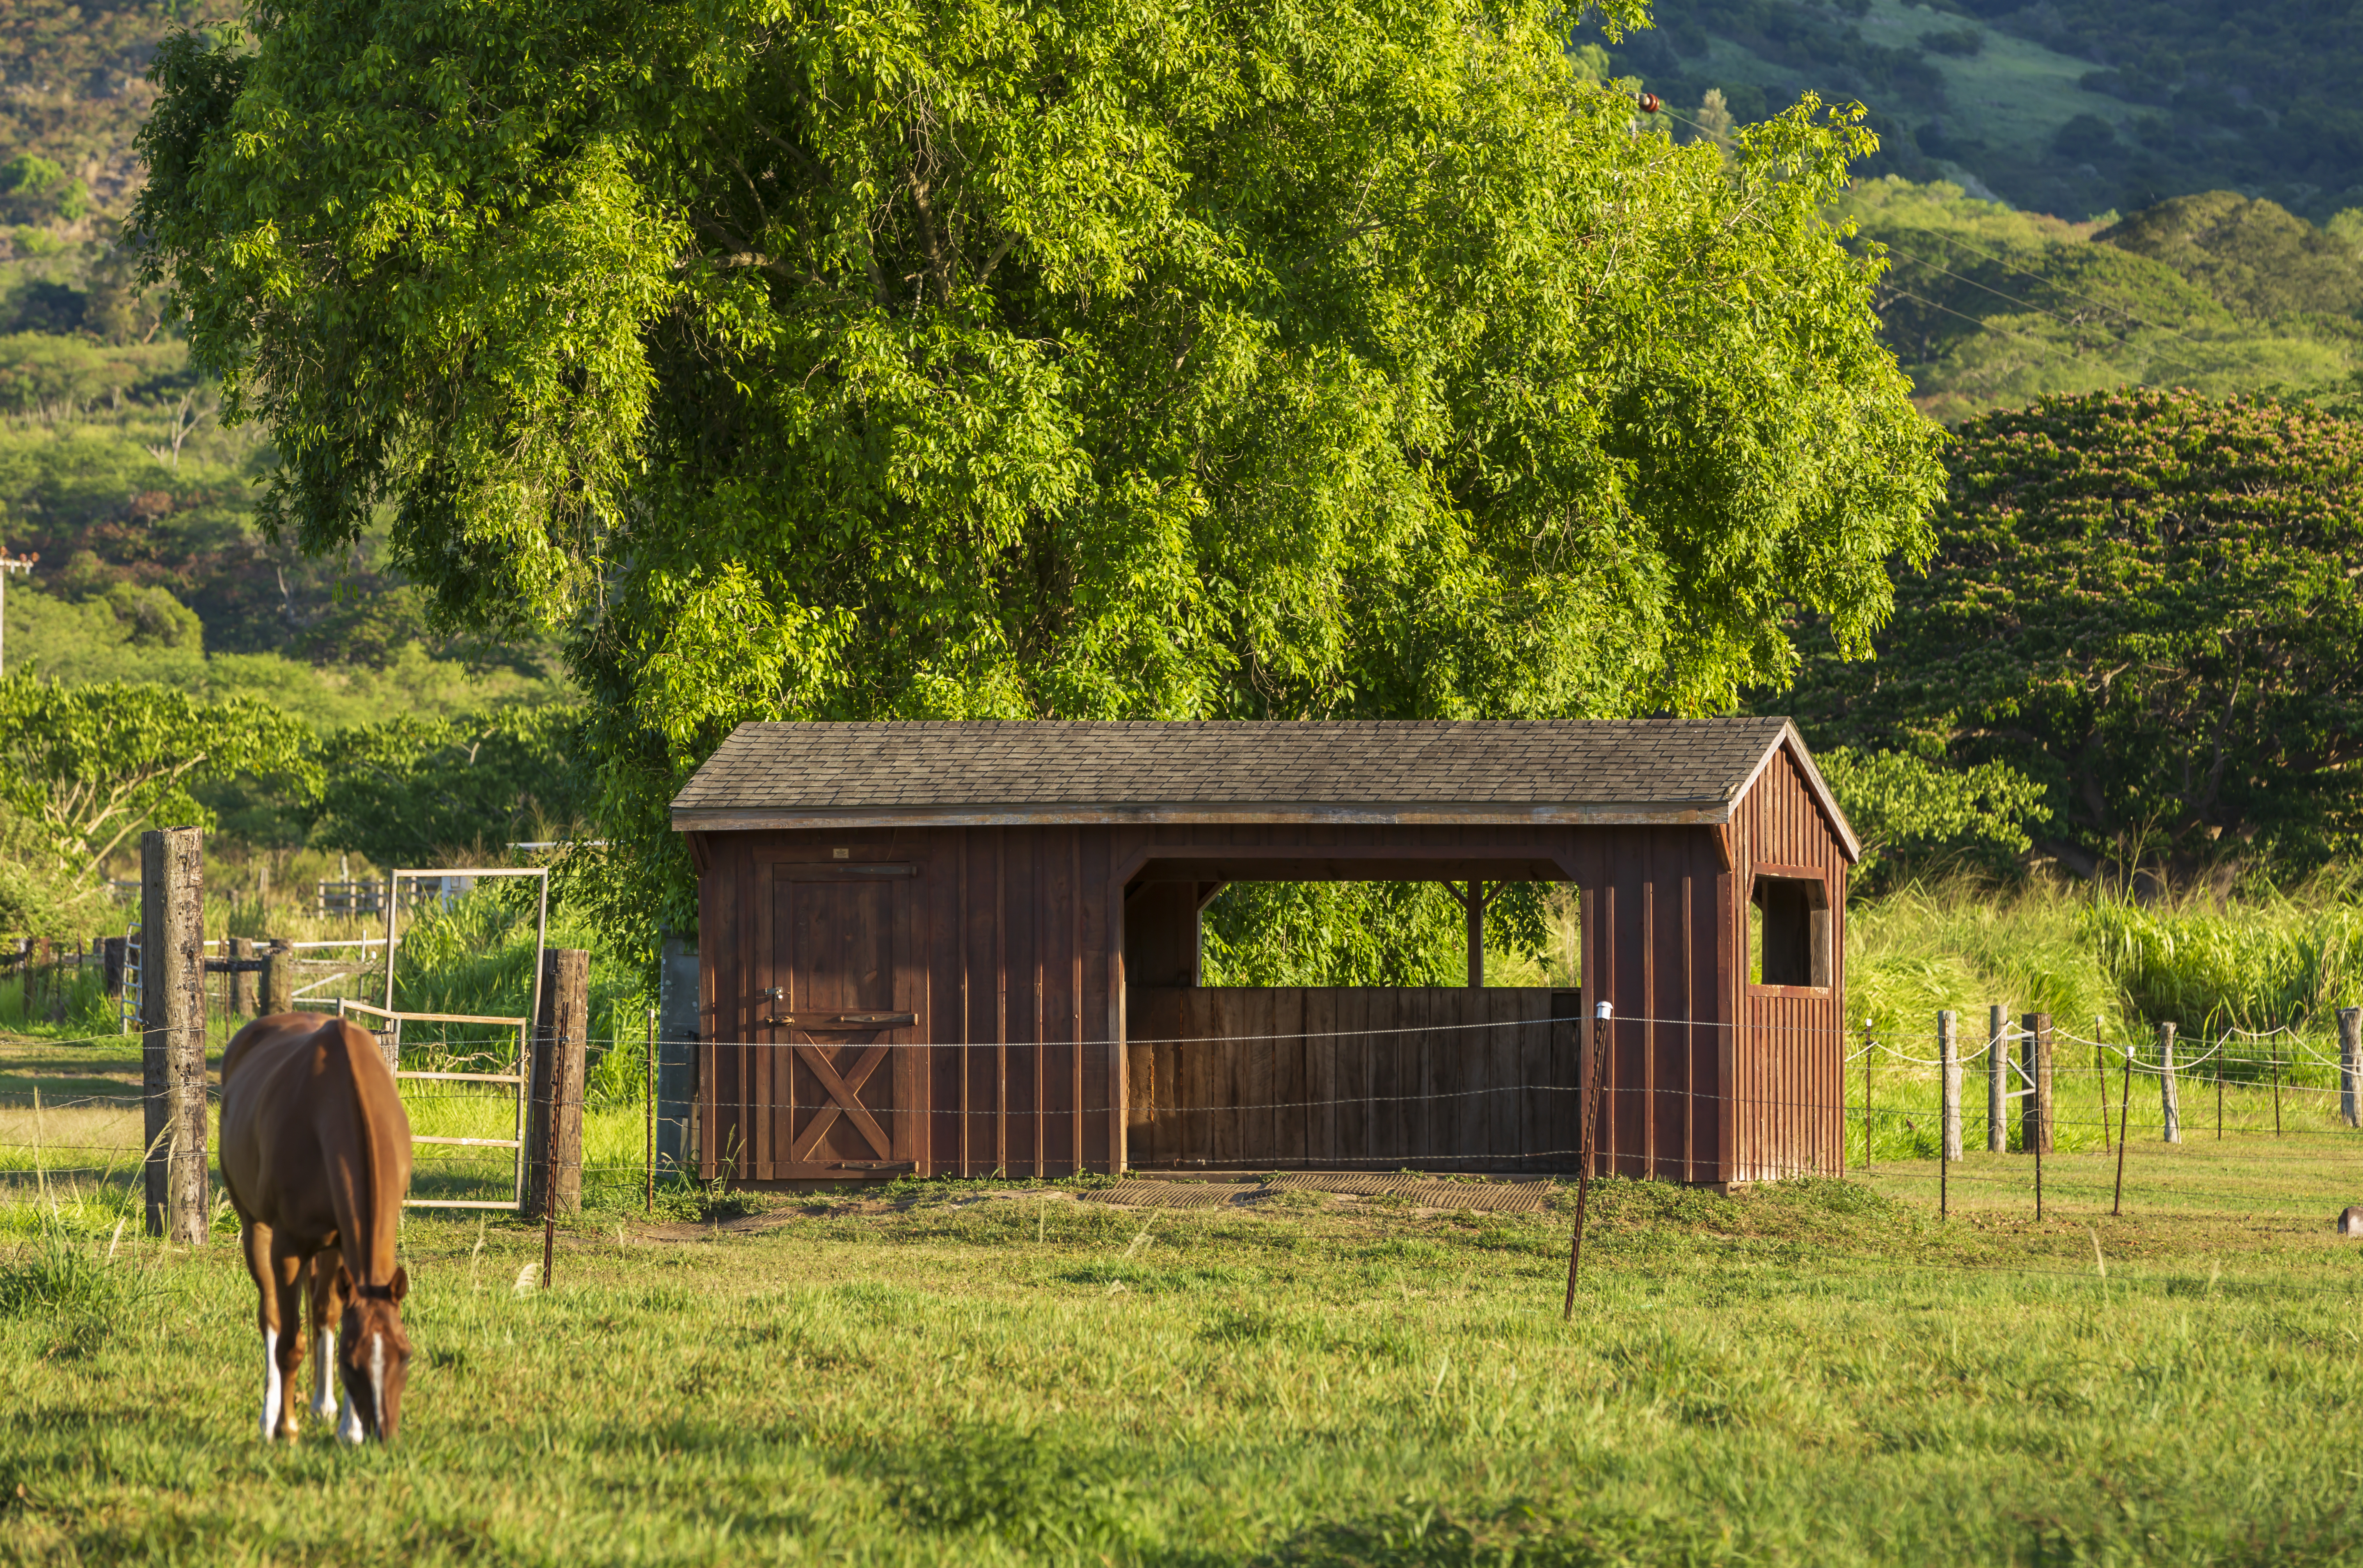 A horse grazing in front of a run-in shed.